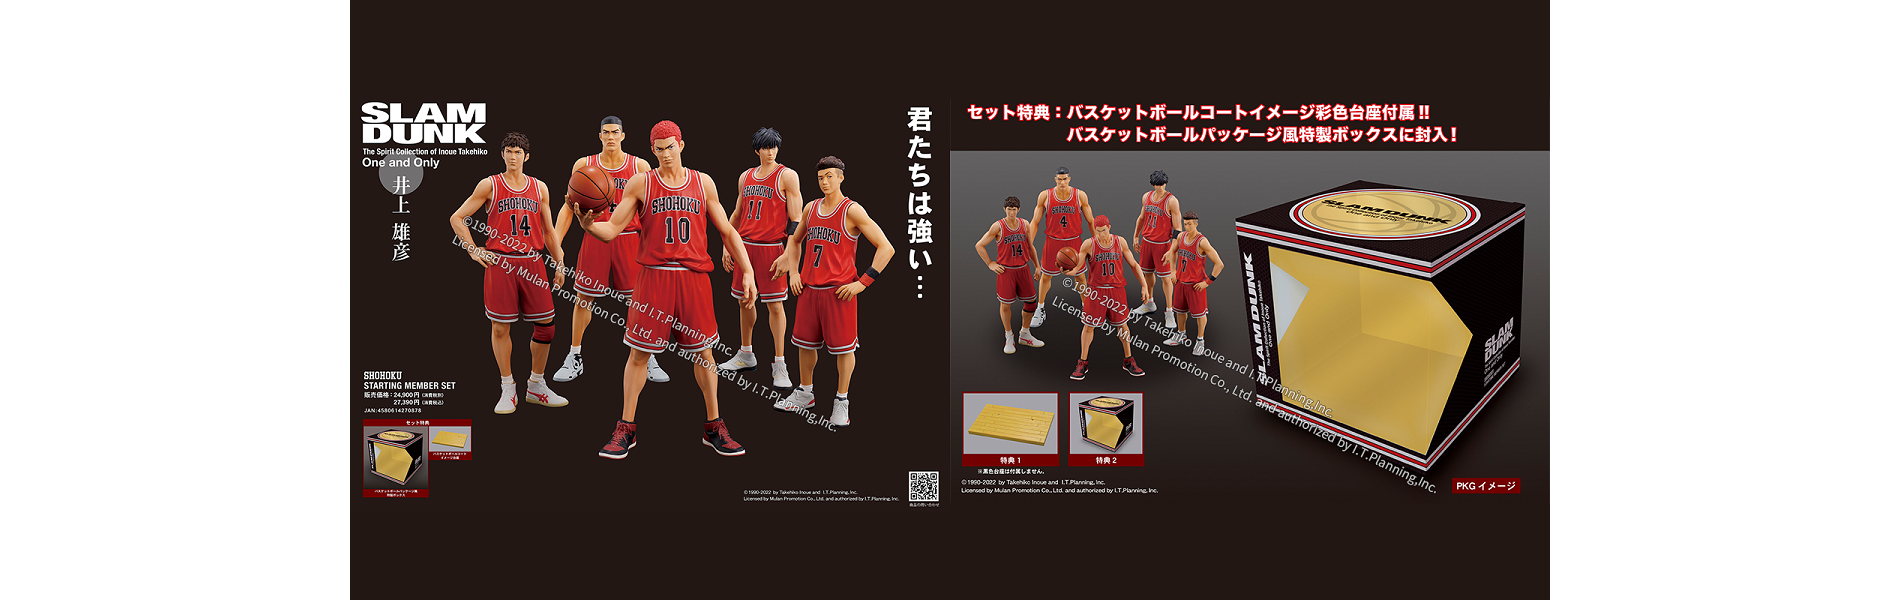 The Spirit Collection of Inoue Takehiko One and Only『SLAM DUNK』